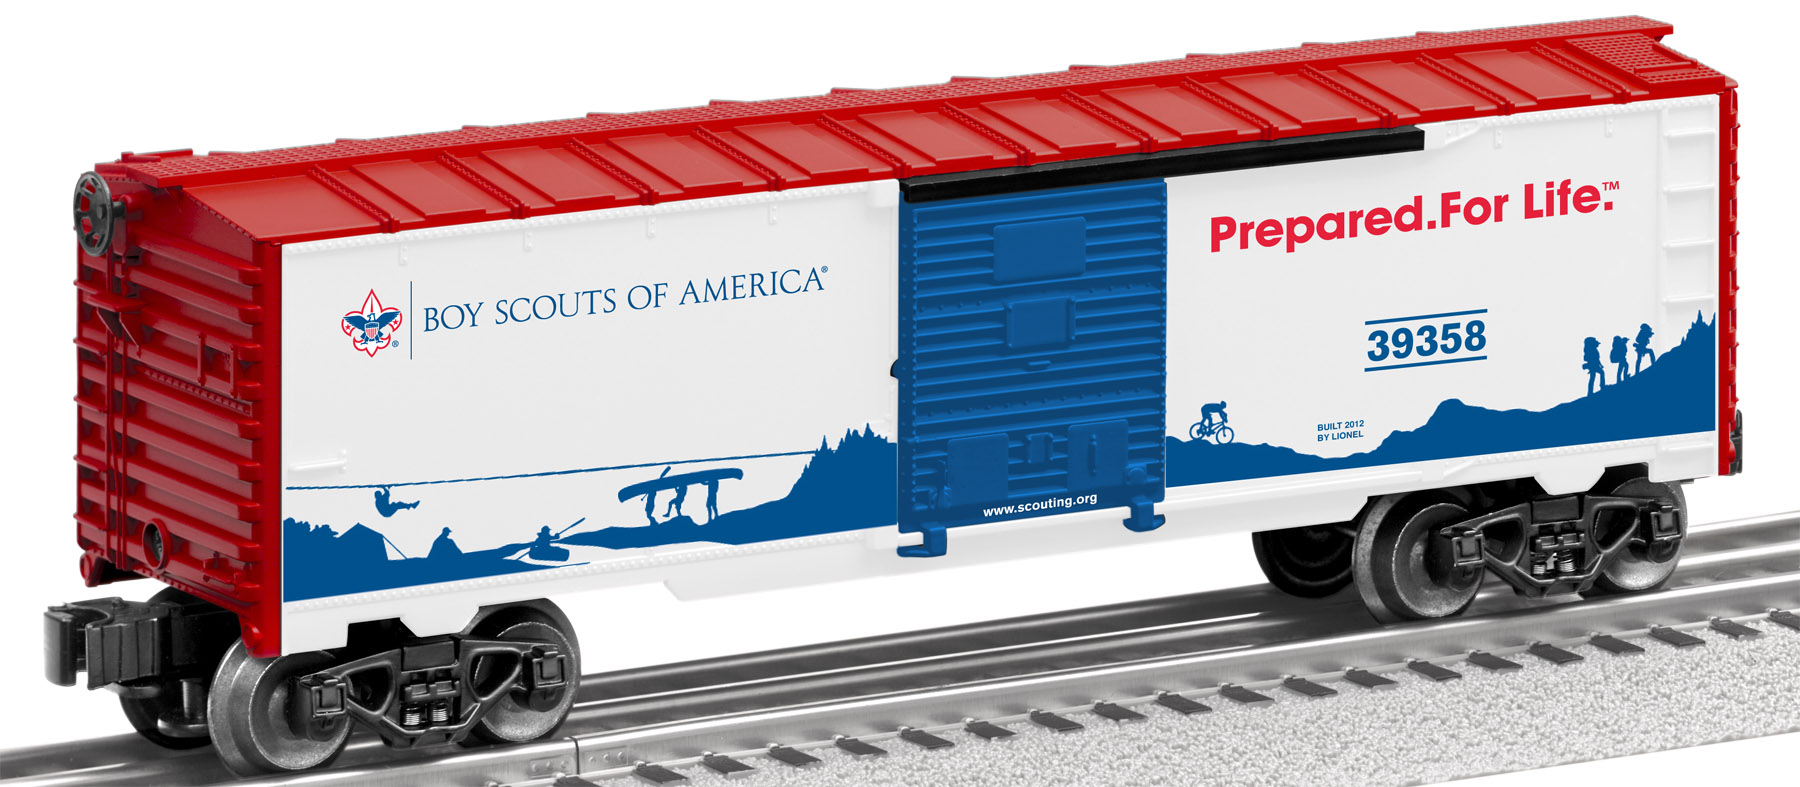 Prepared. For Life™ Boxcar image